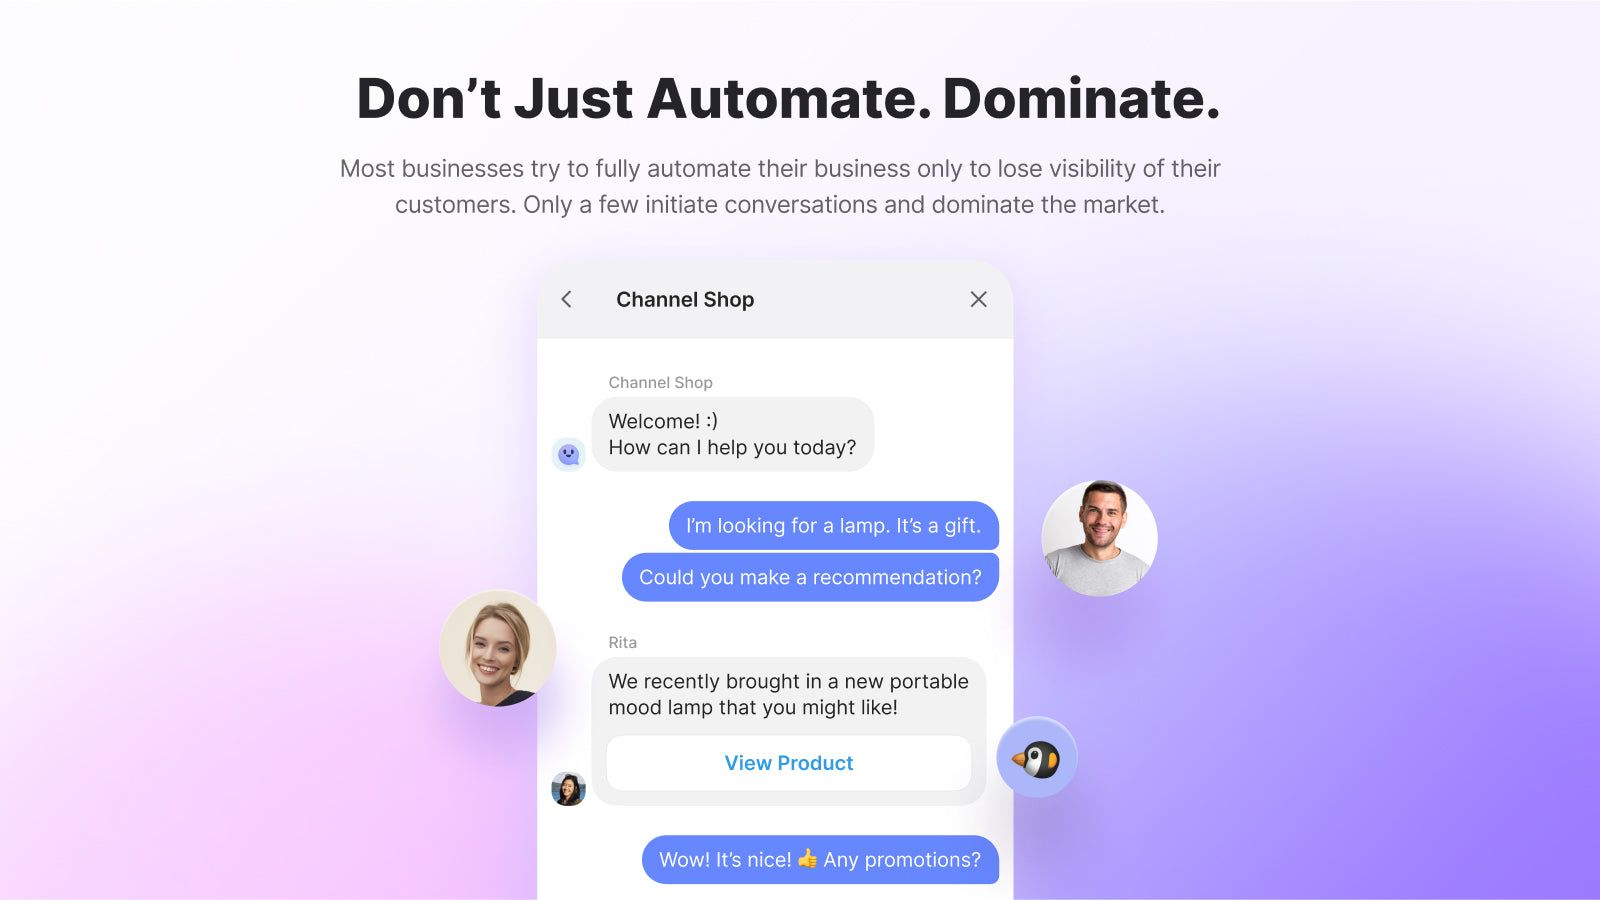 Don’t Just Automate. Dominate. - improve visibility of customers